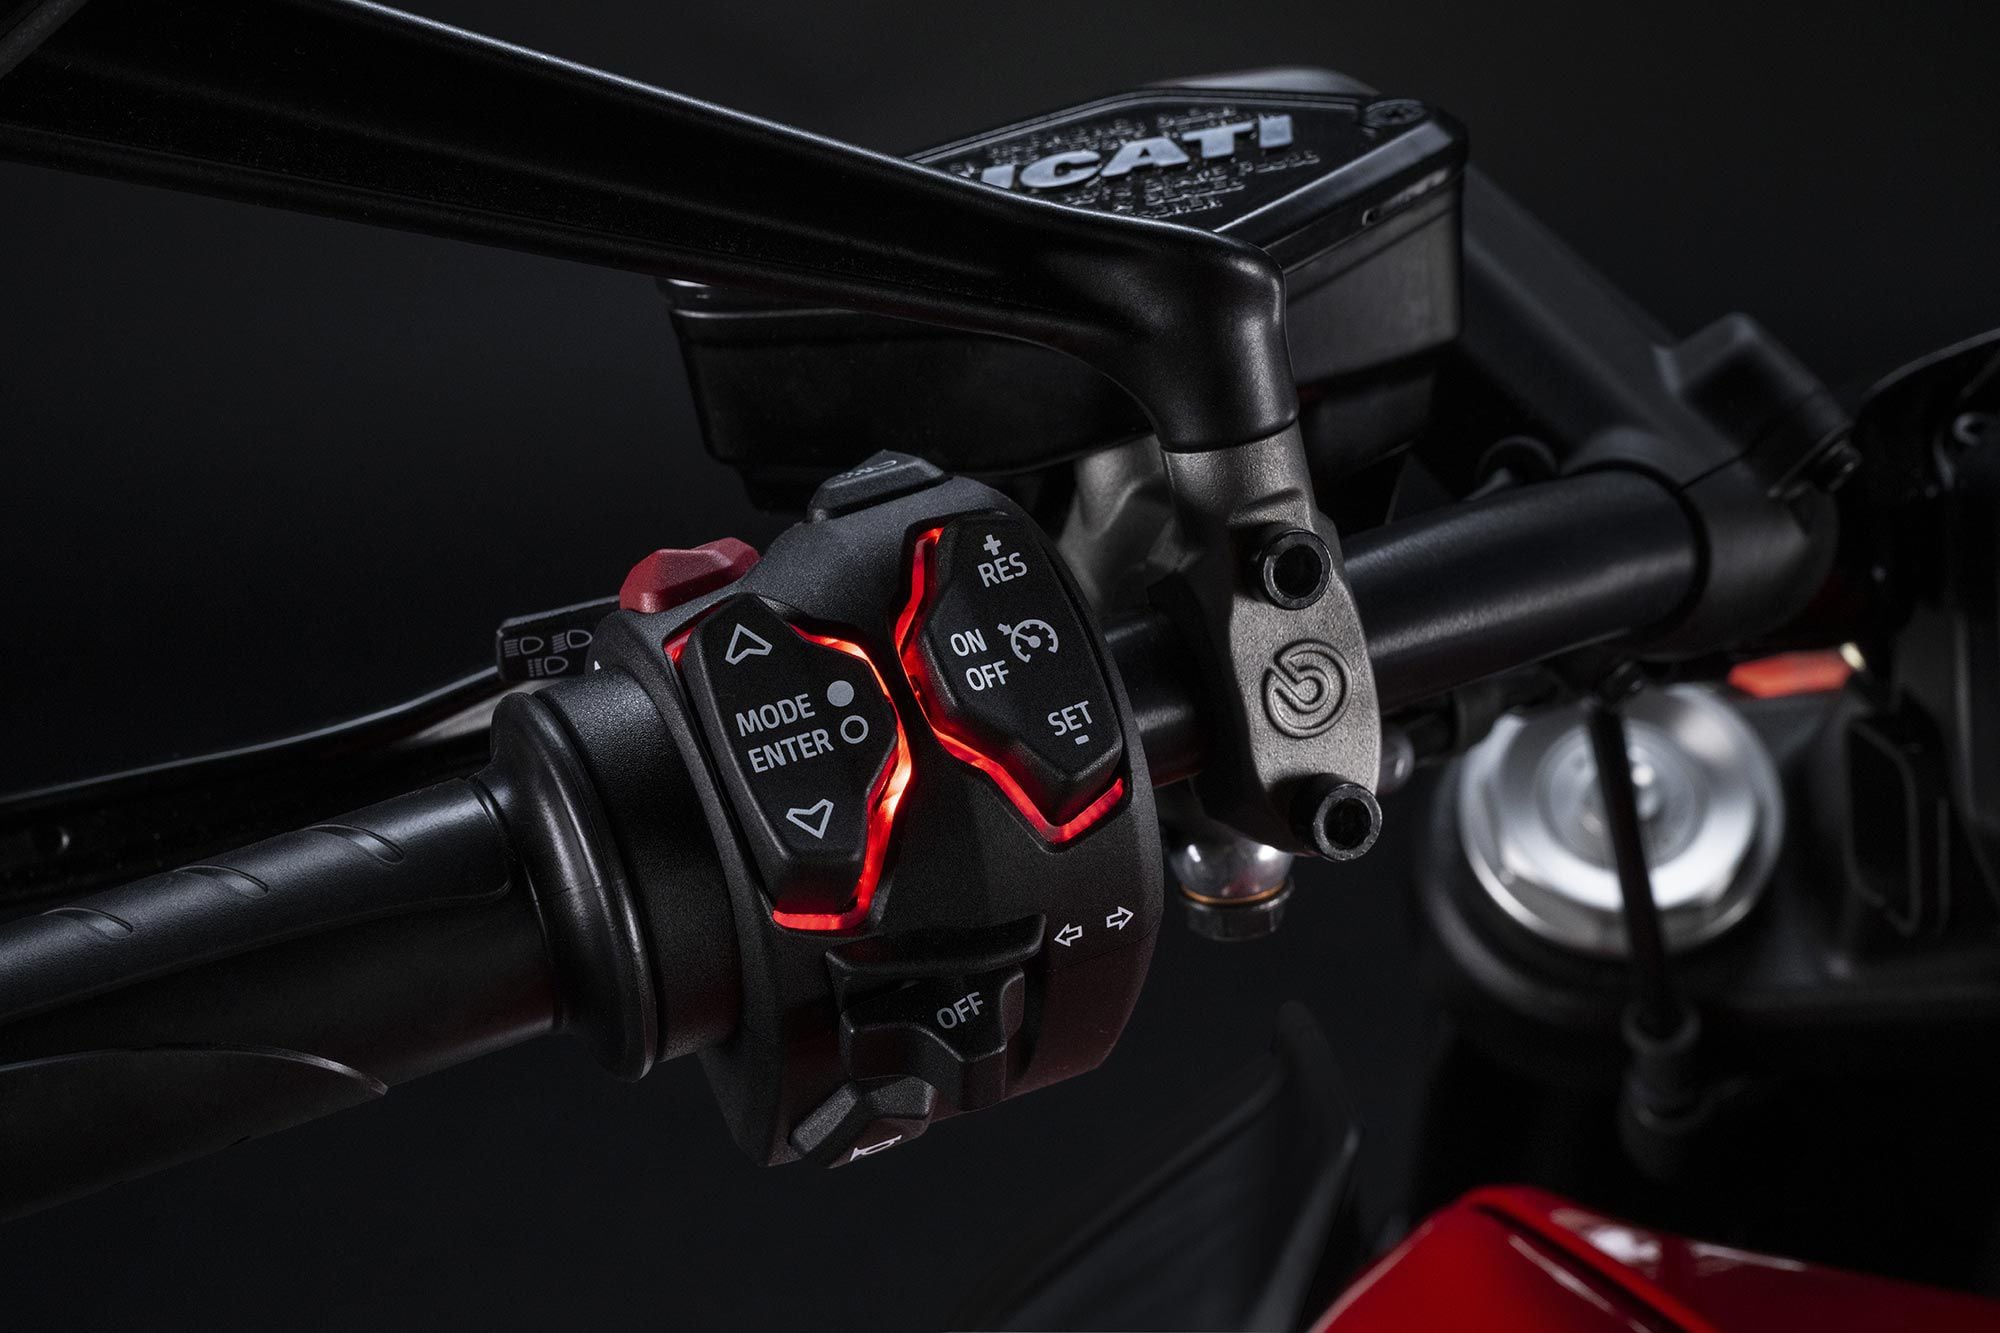 Backlit, and well-designed switches enable the rider to easily adjust rider-aid and cruise control settings.